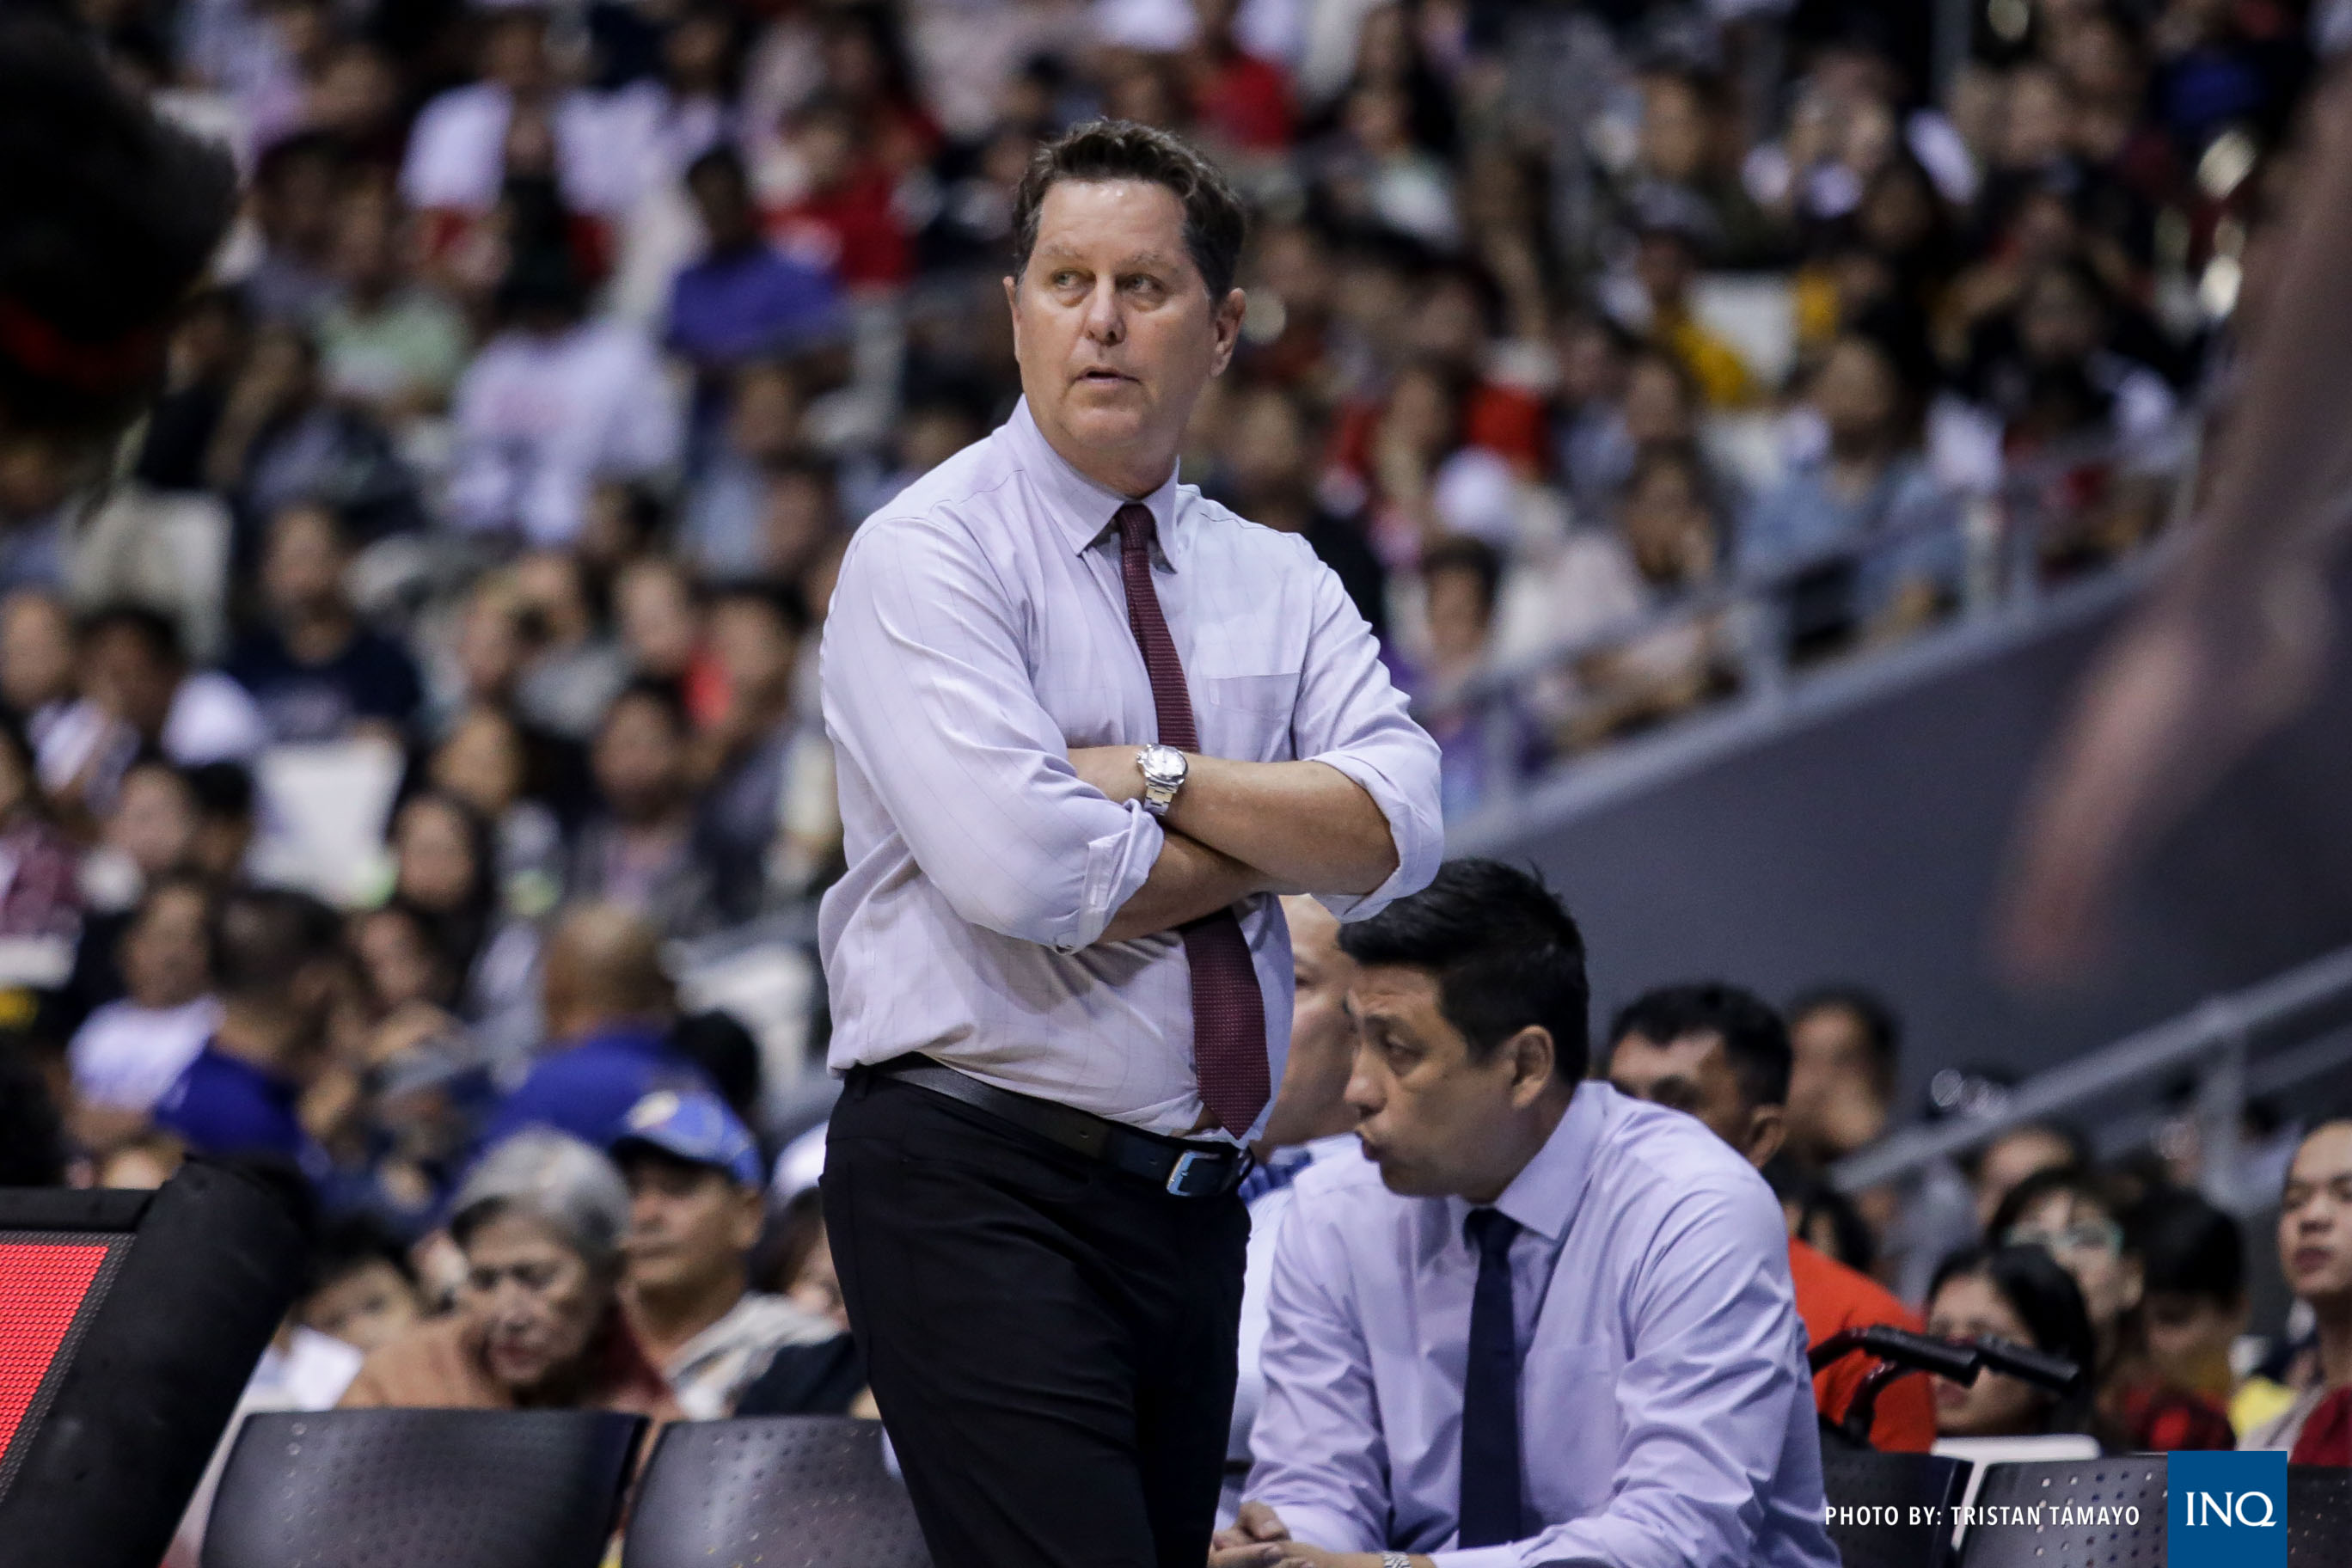 Cone says a team of PBA's five best players 'probably still won't